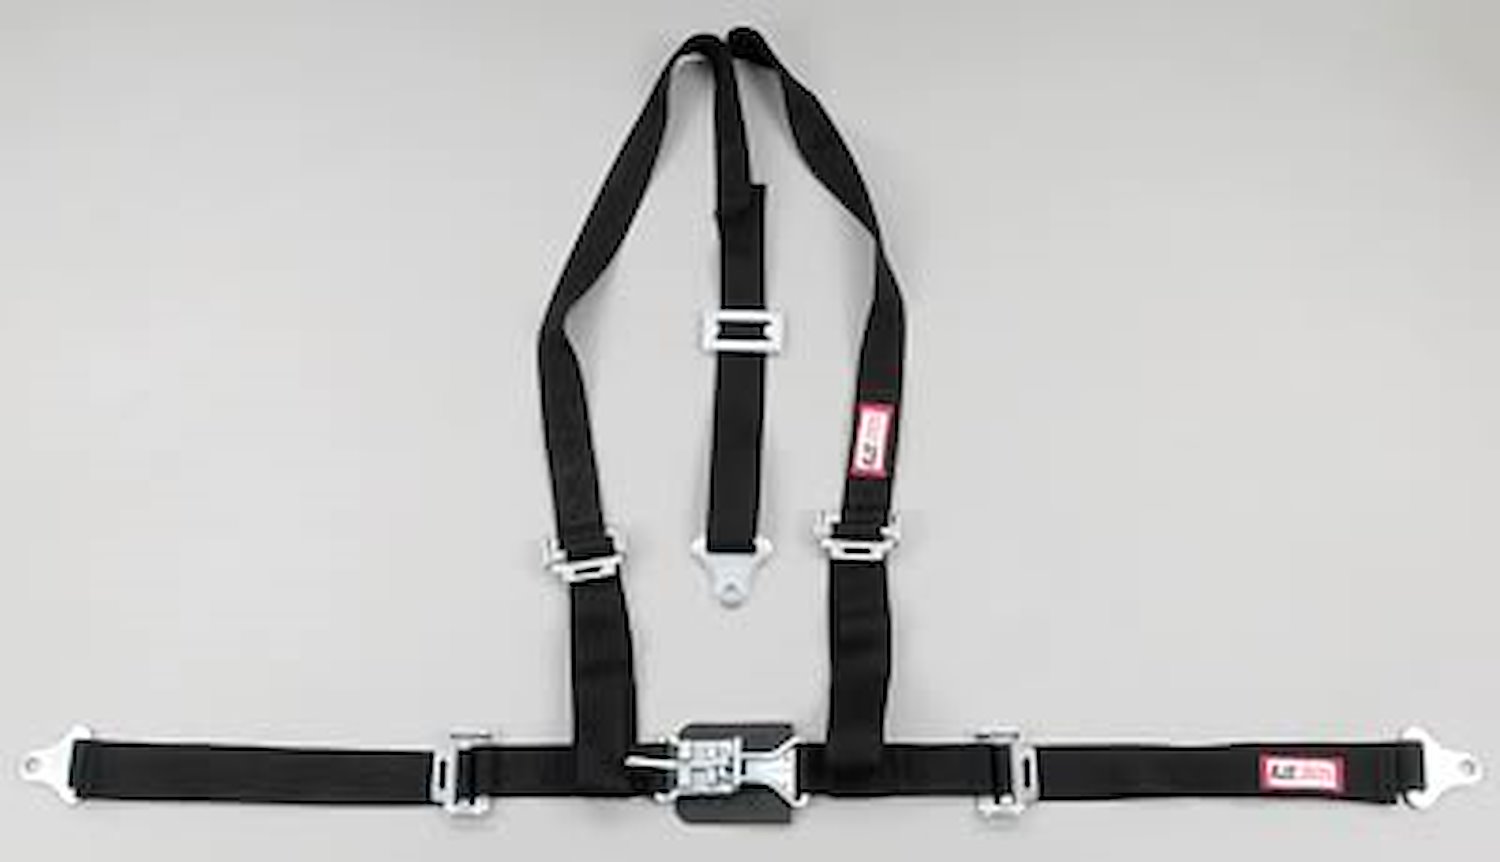 NON-SFI L&L HARNESS 3 PULL DOWN Lap Belt SEWN IN 2 S.H. Individual ROLL BAR Mount w/STERNUM STRAP ALL WRAP ENDS BLUE